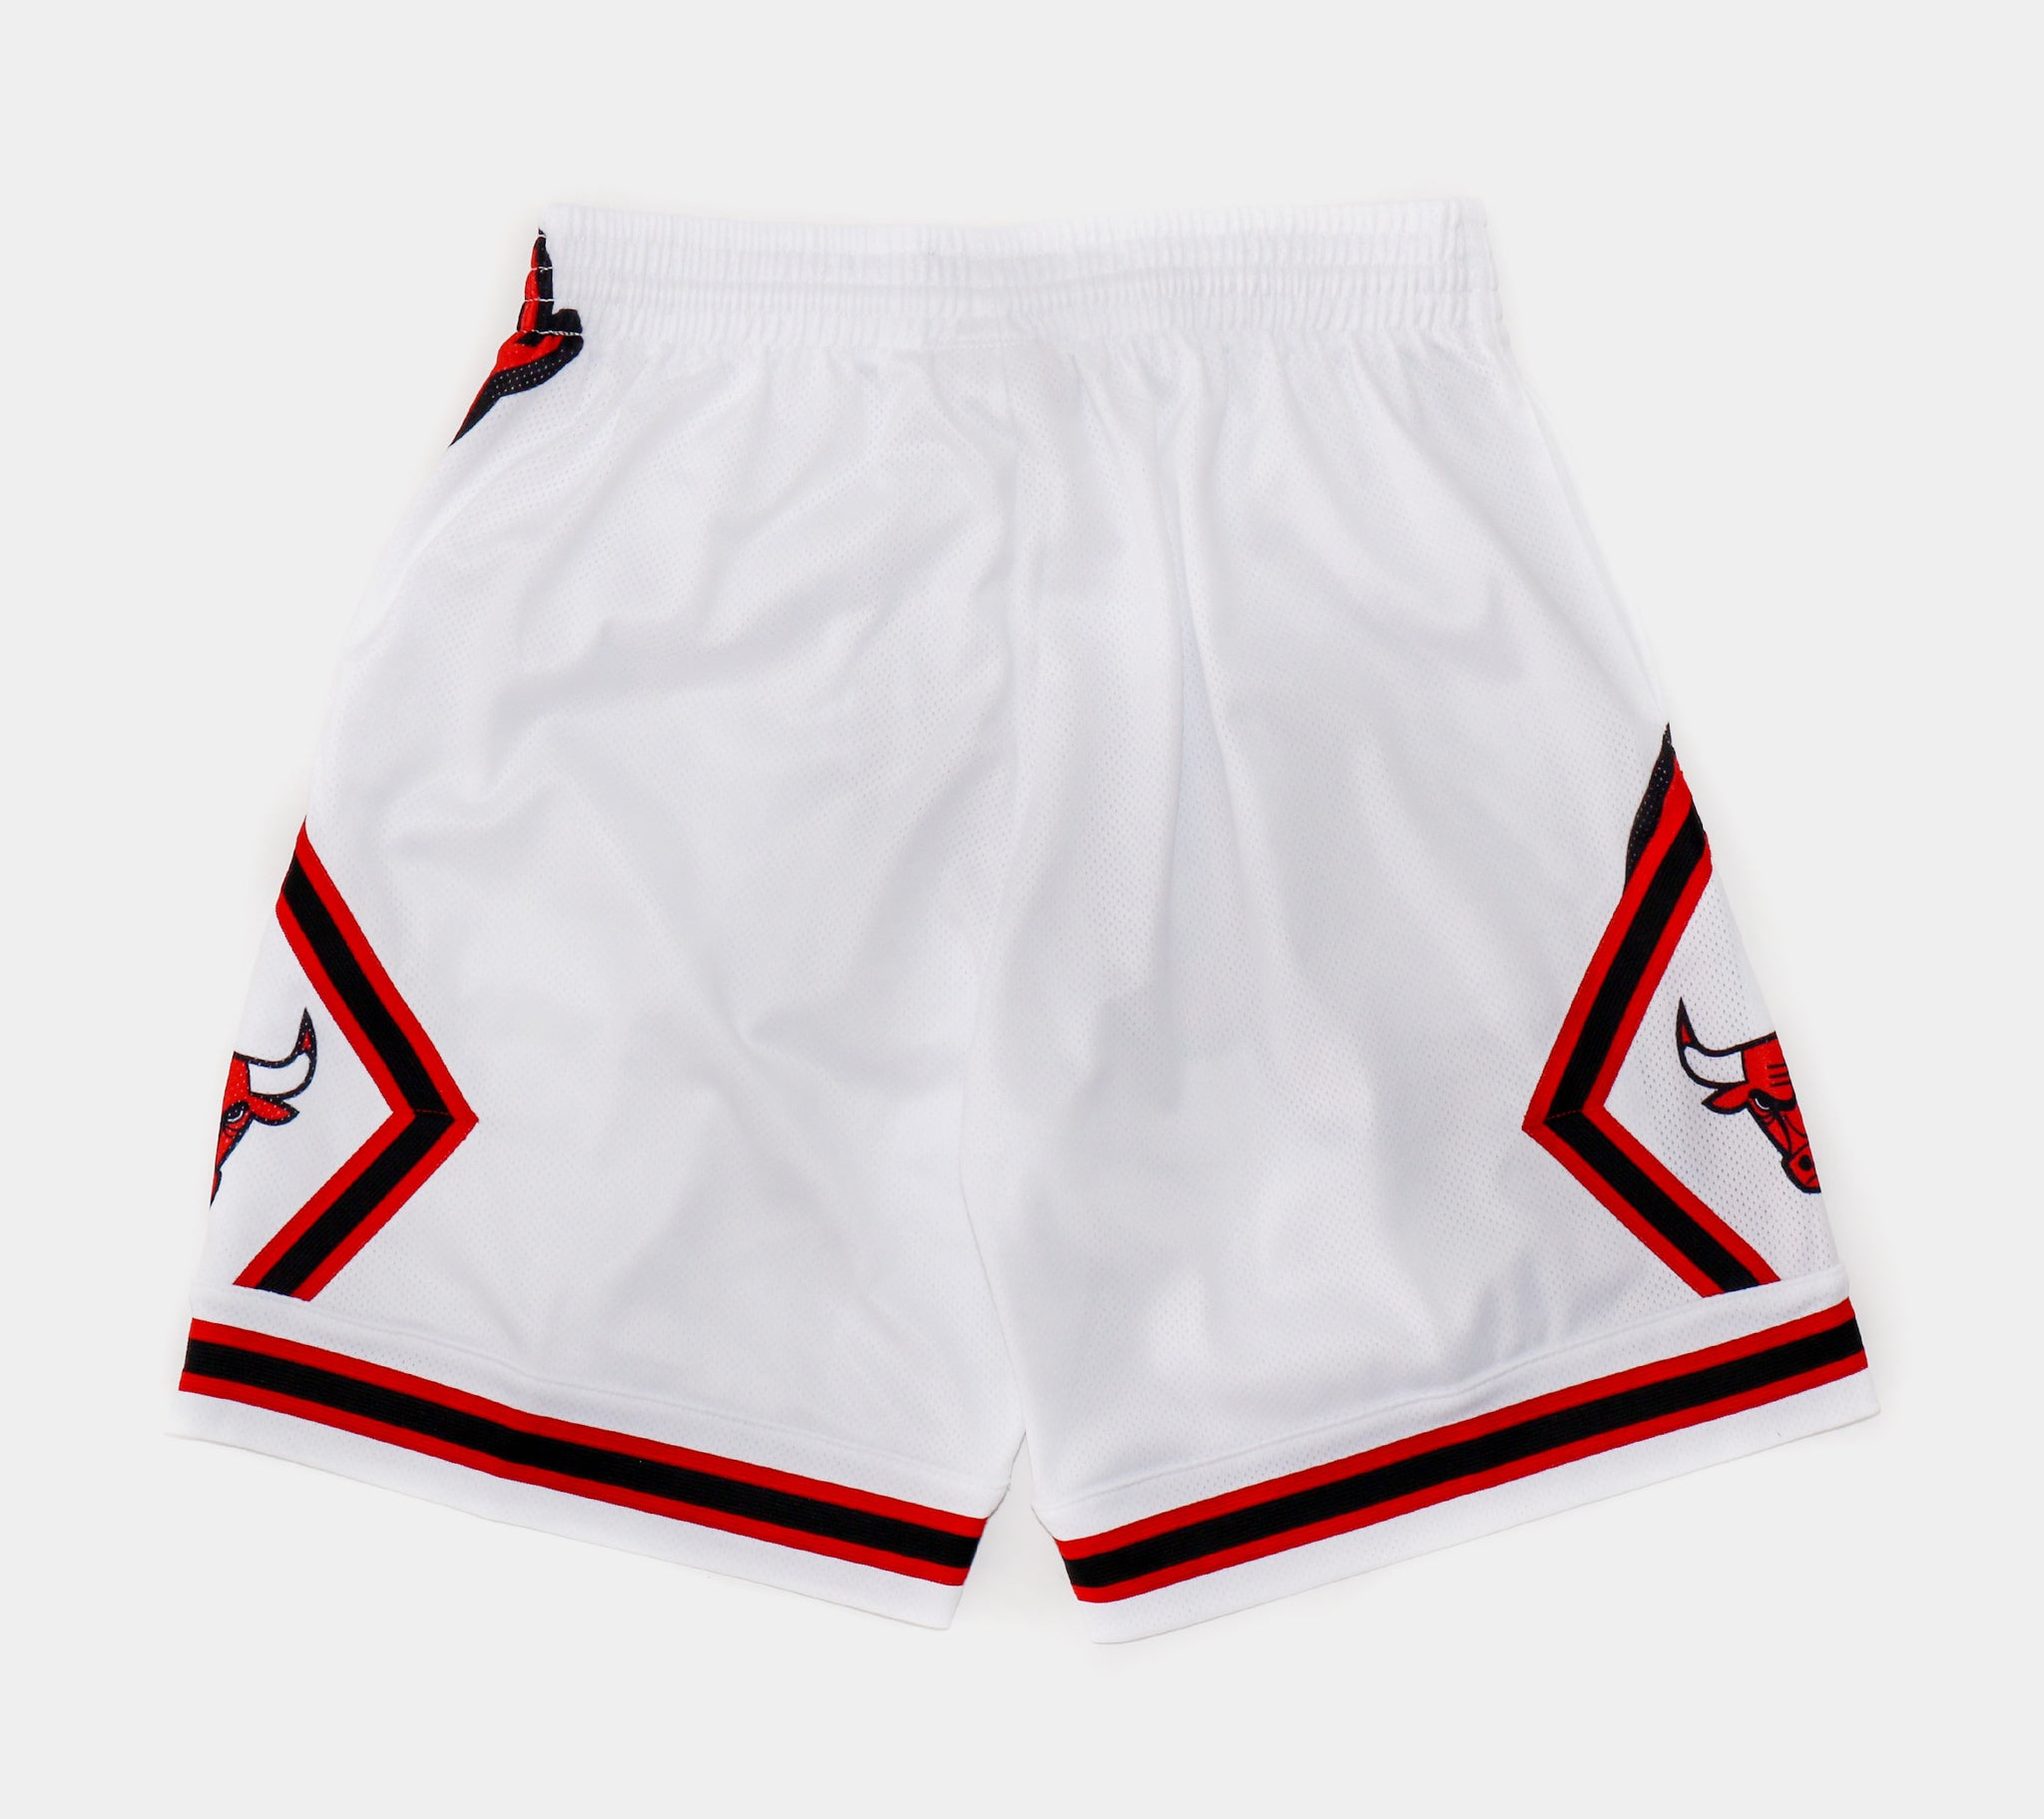 Mitchell & Ness Men's Shorts - Red - L